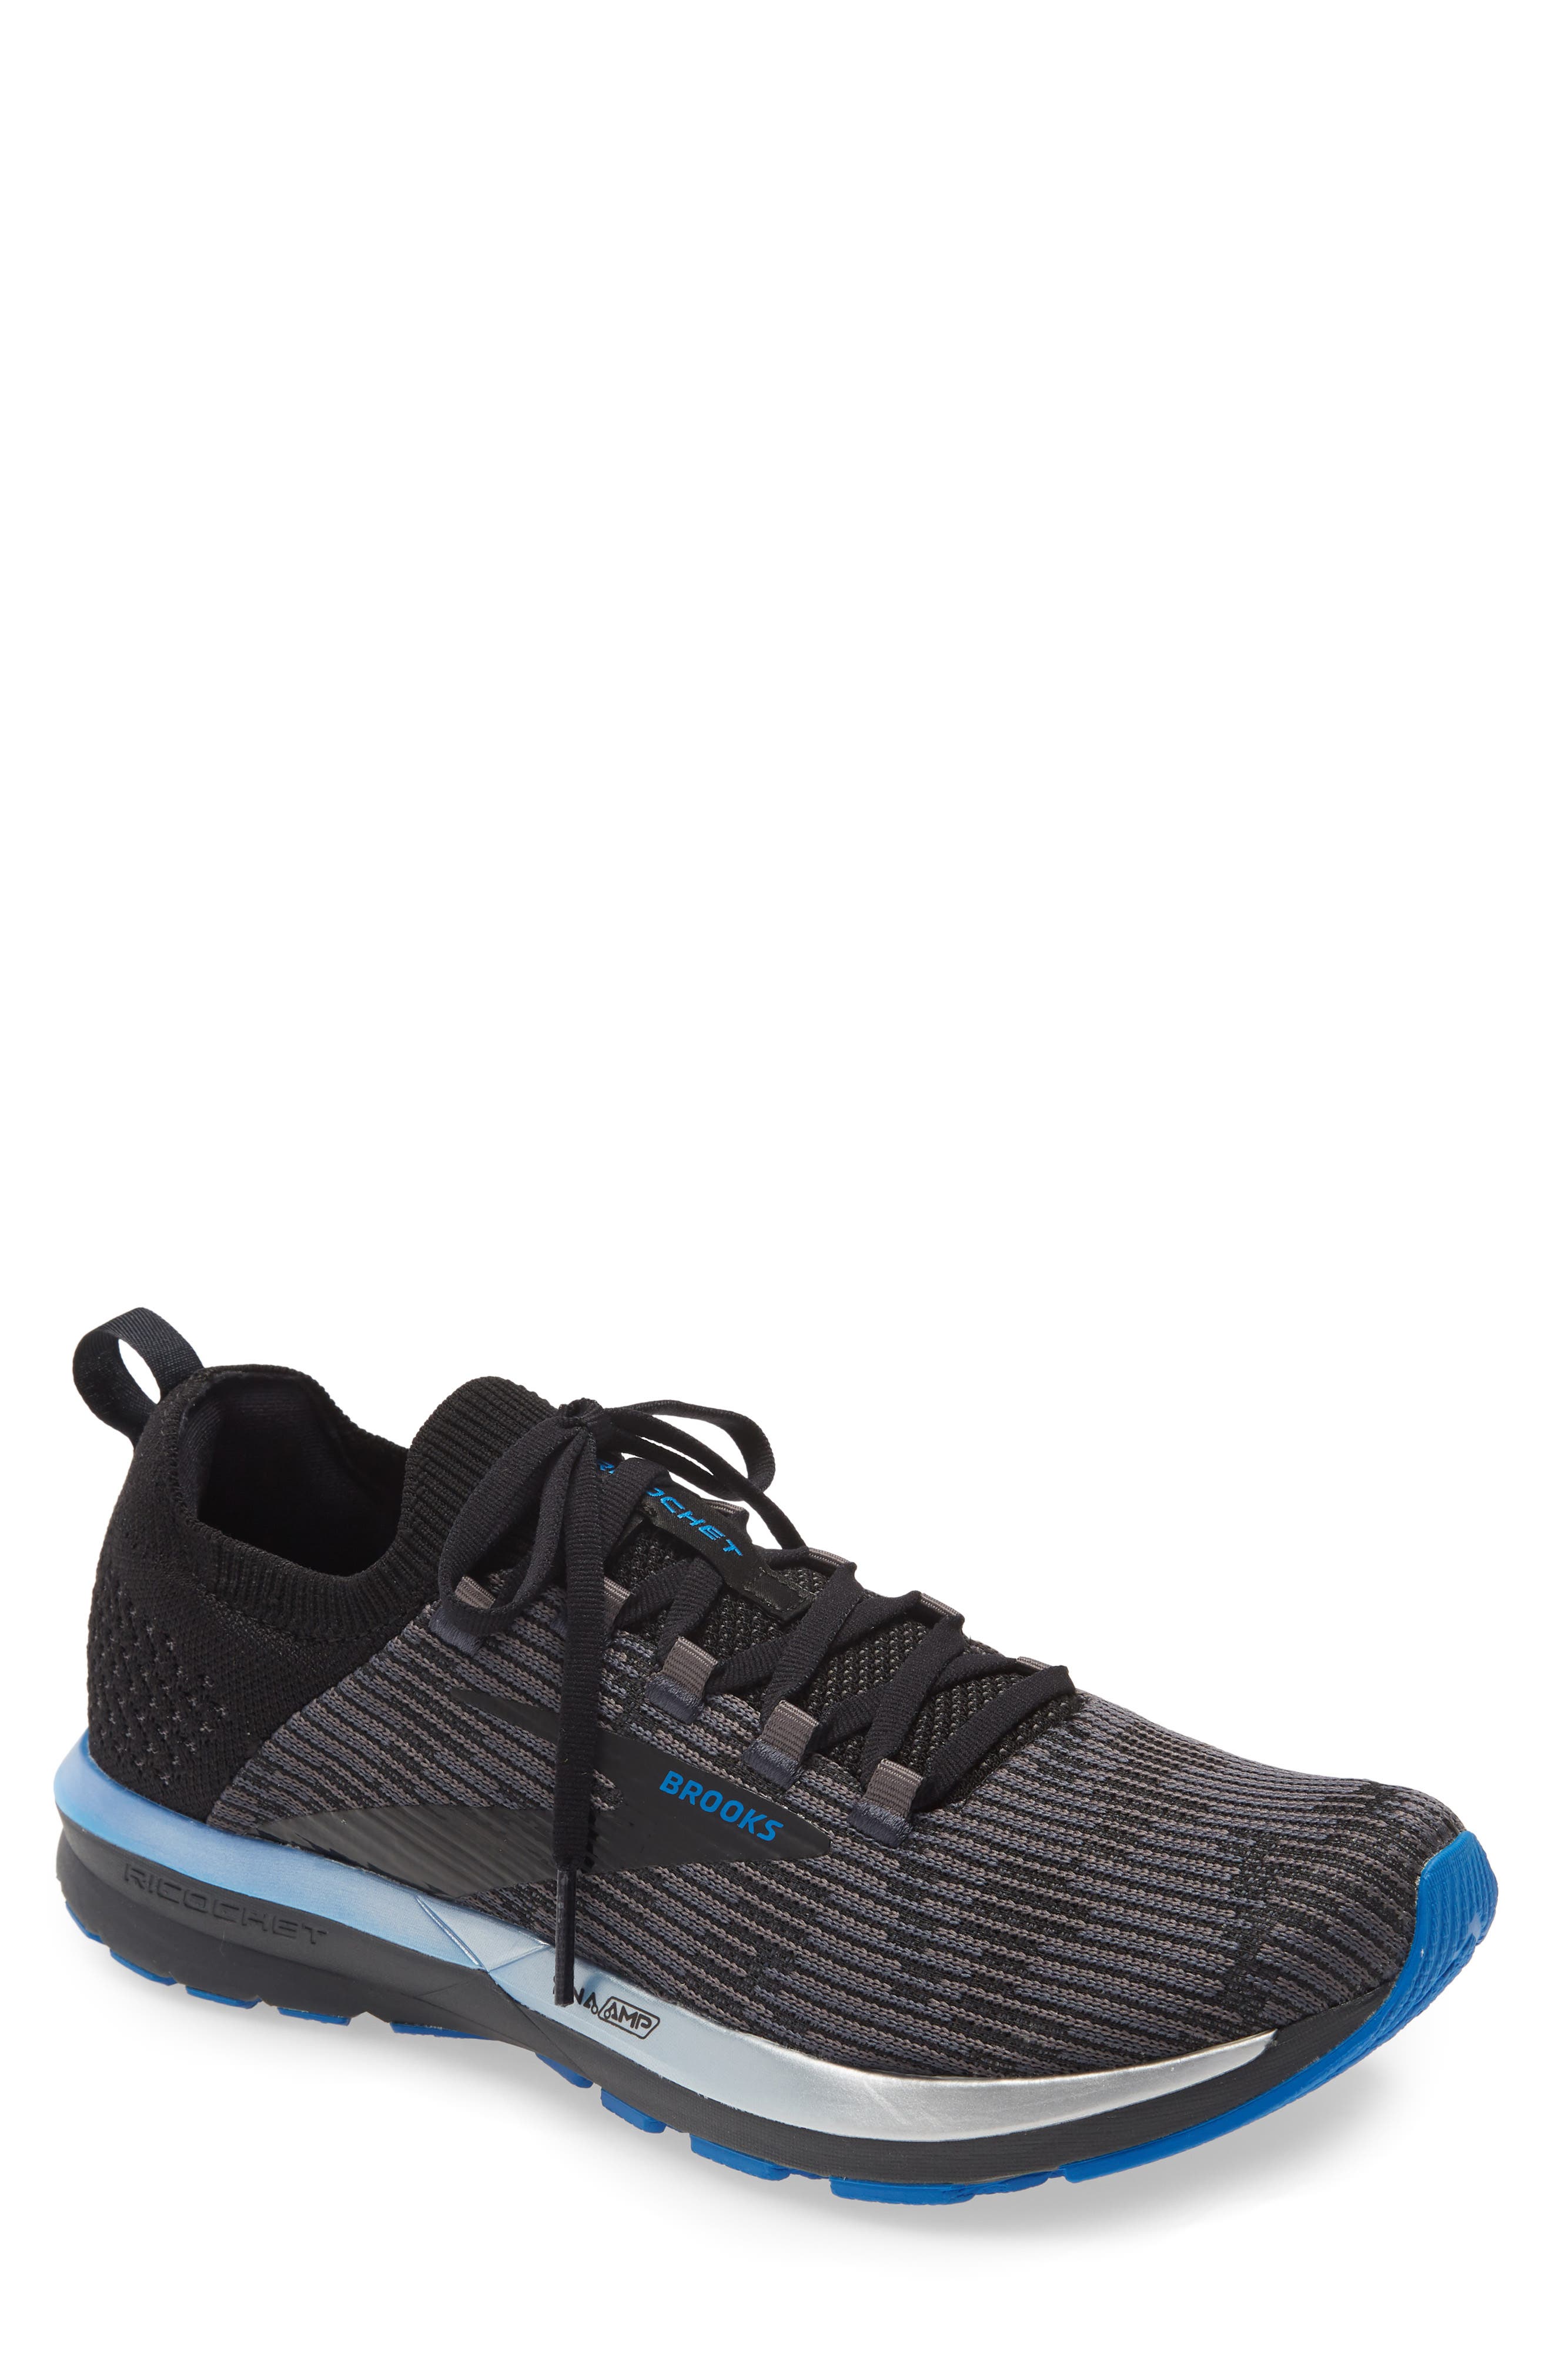 clearance brooks men's running shoes